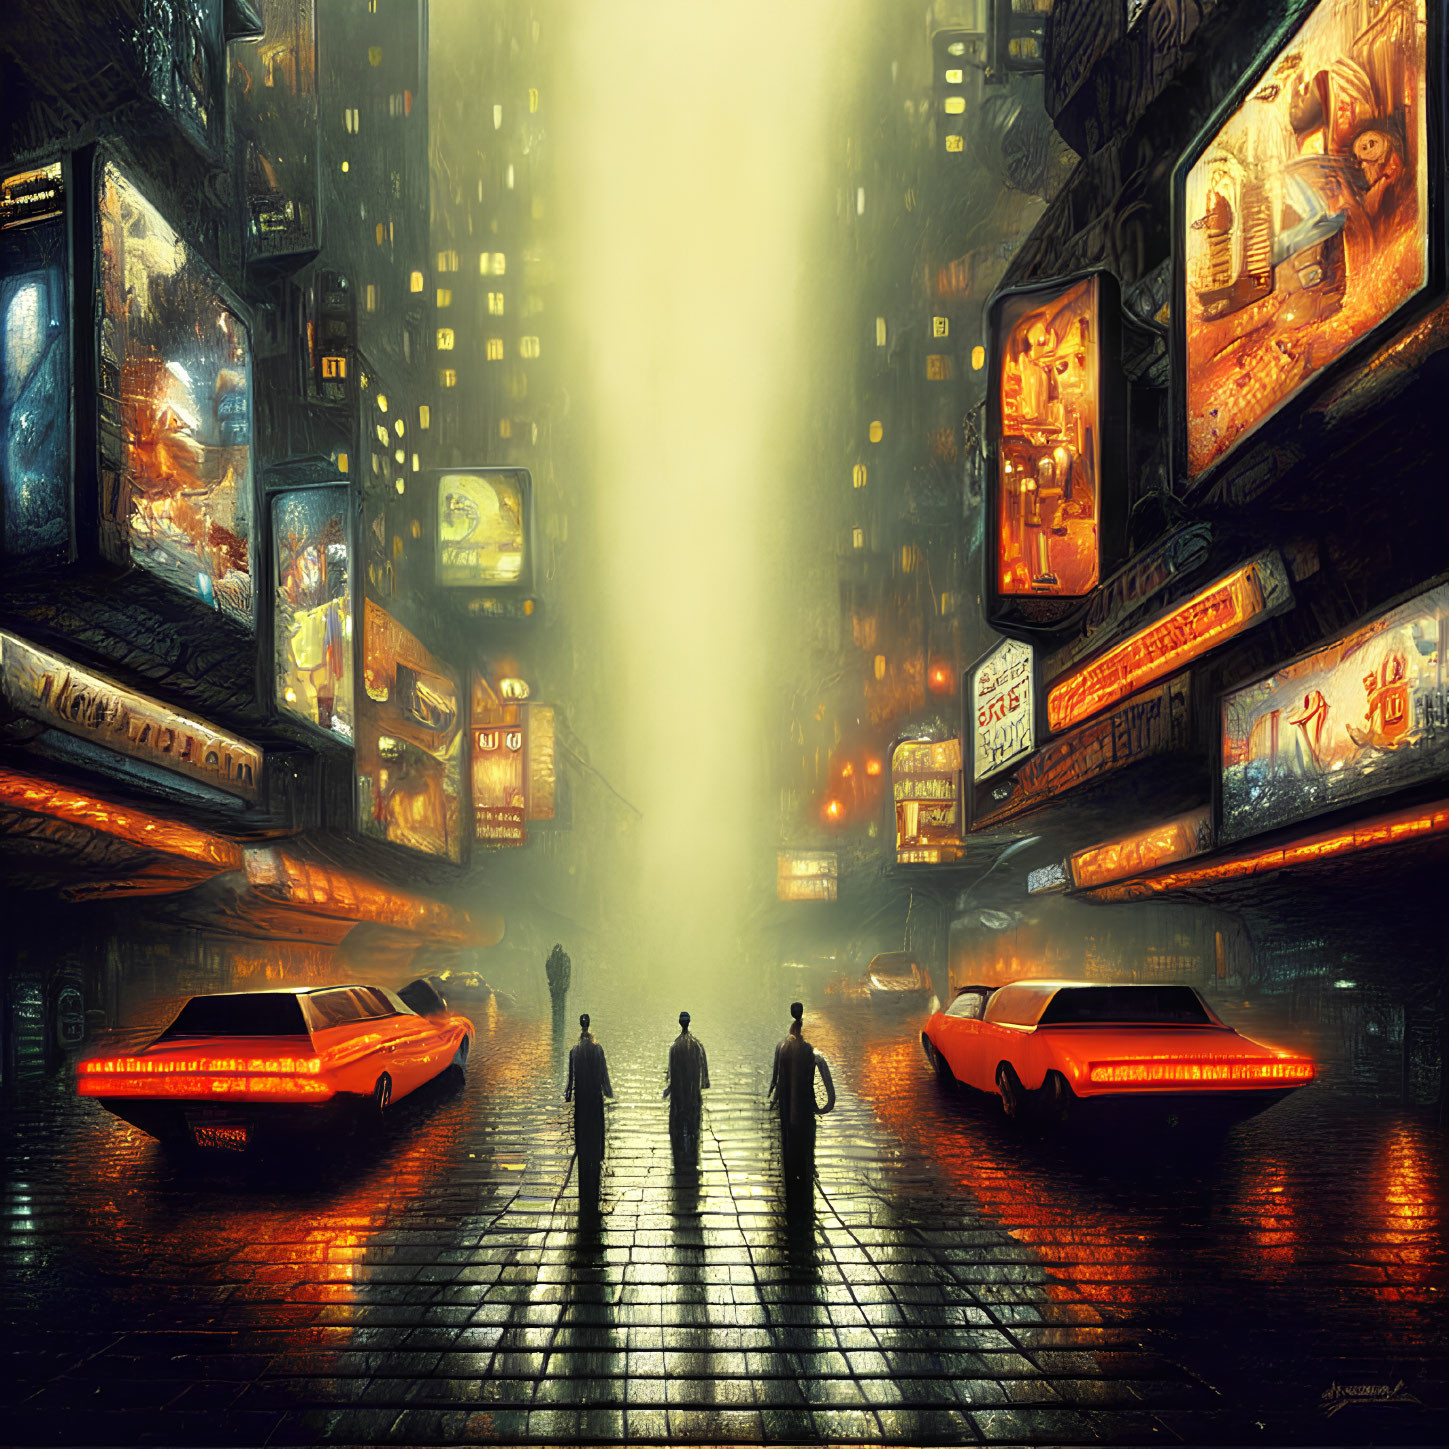 Futuristic night cityscape with glowing billboards, people, and hover cars